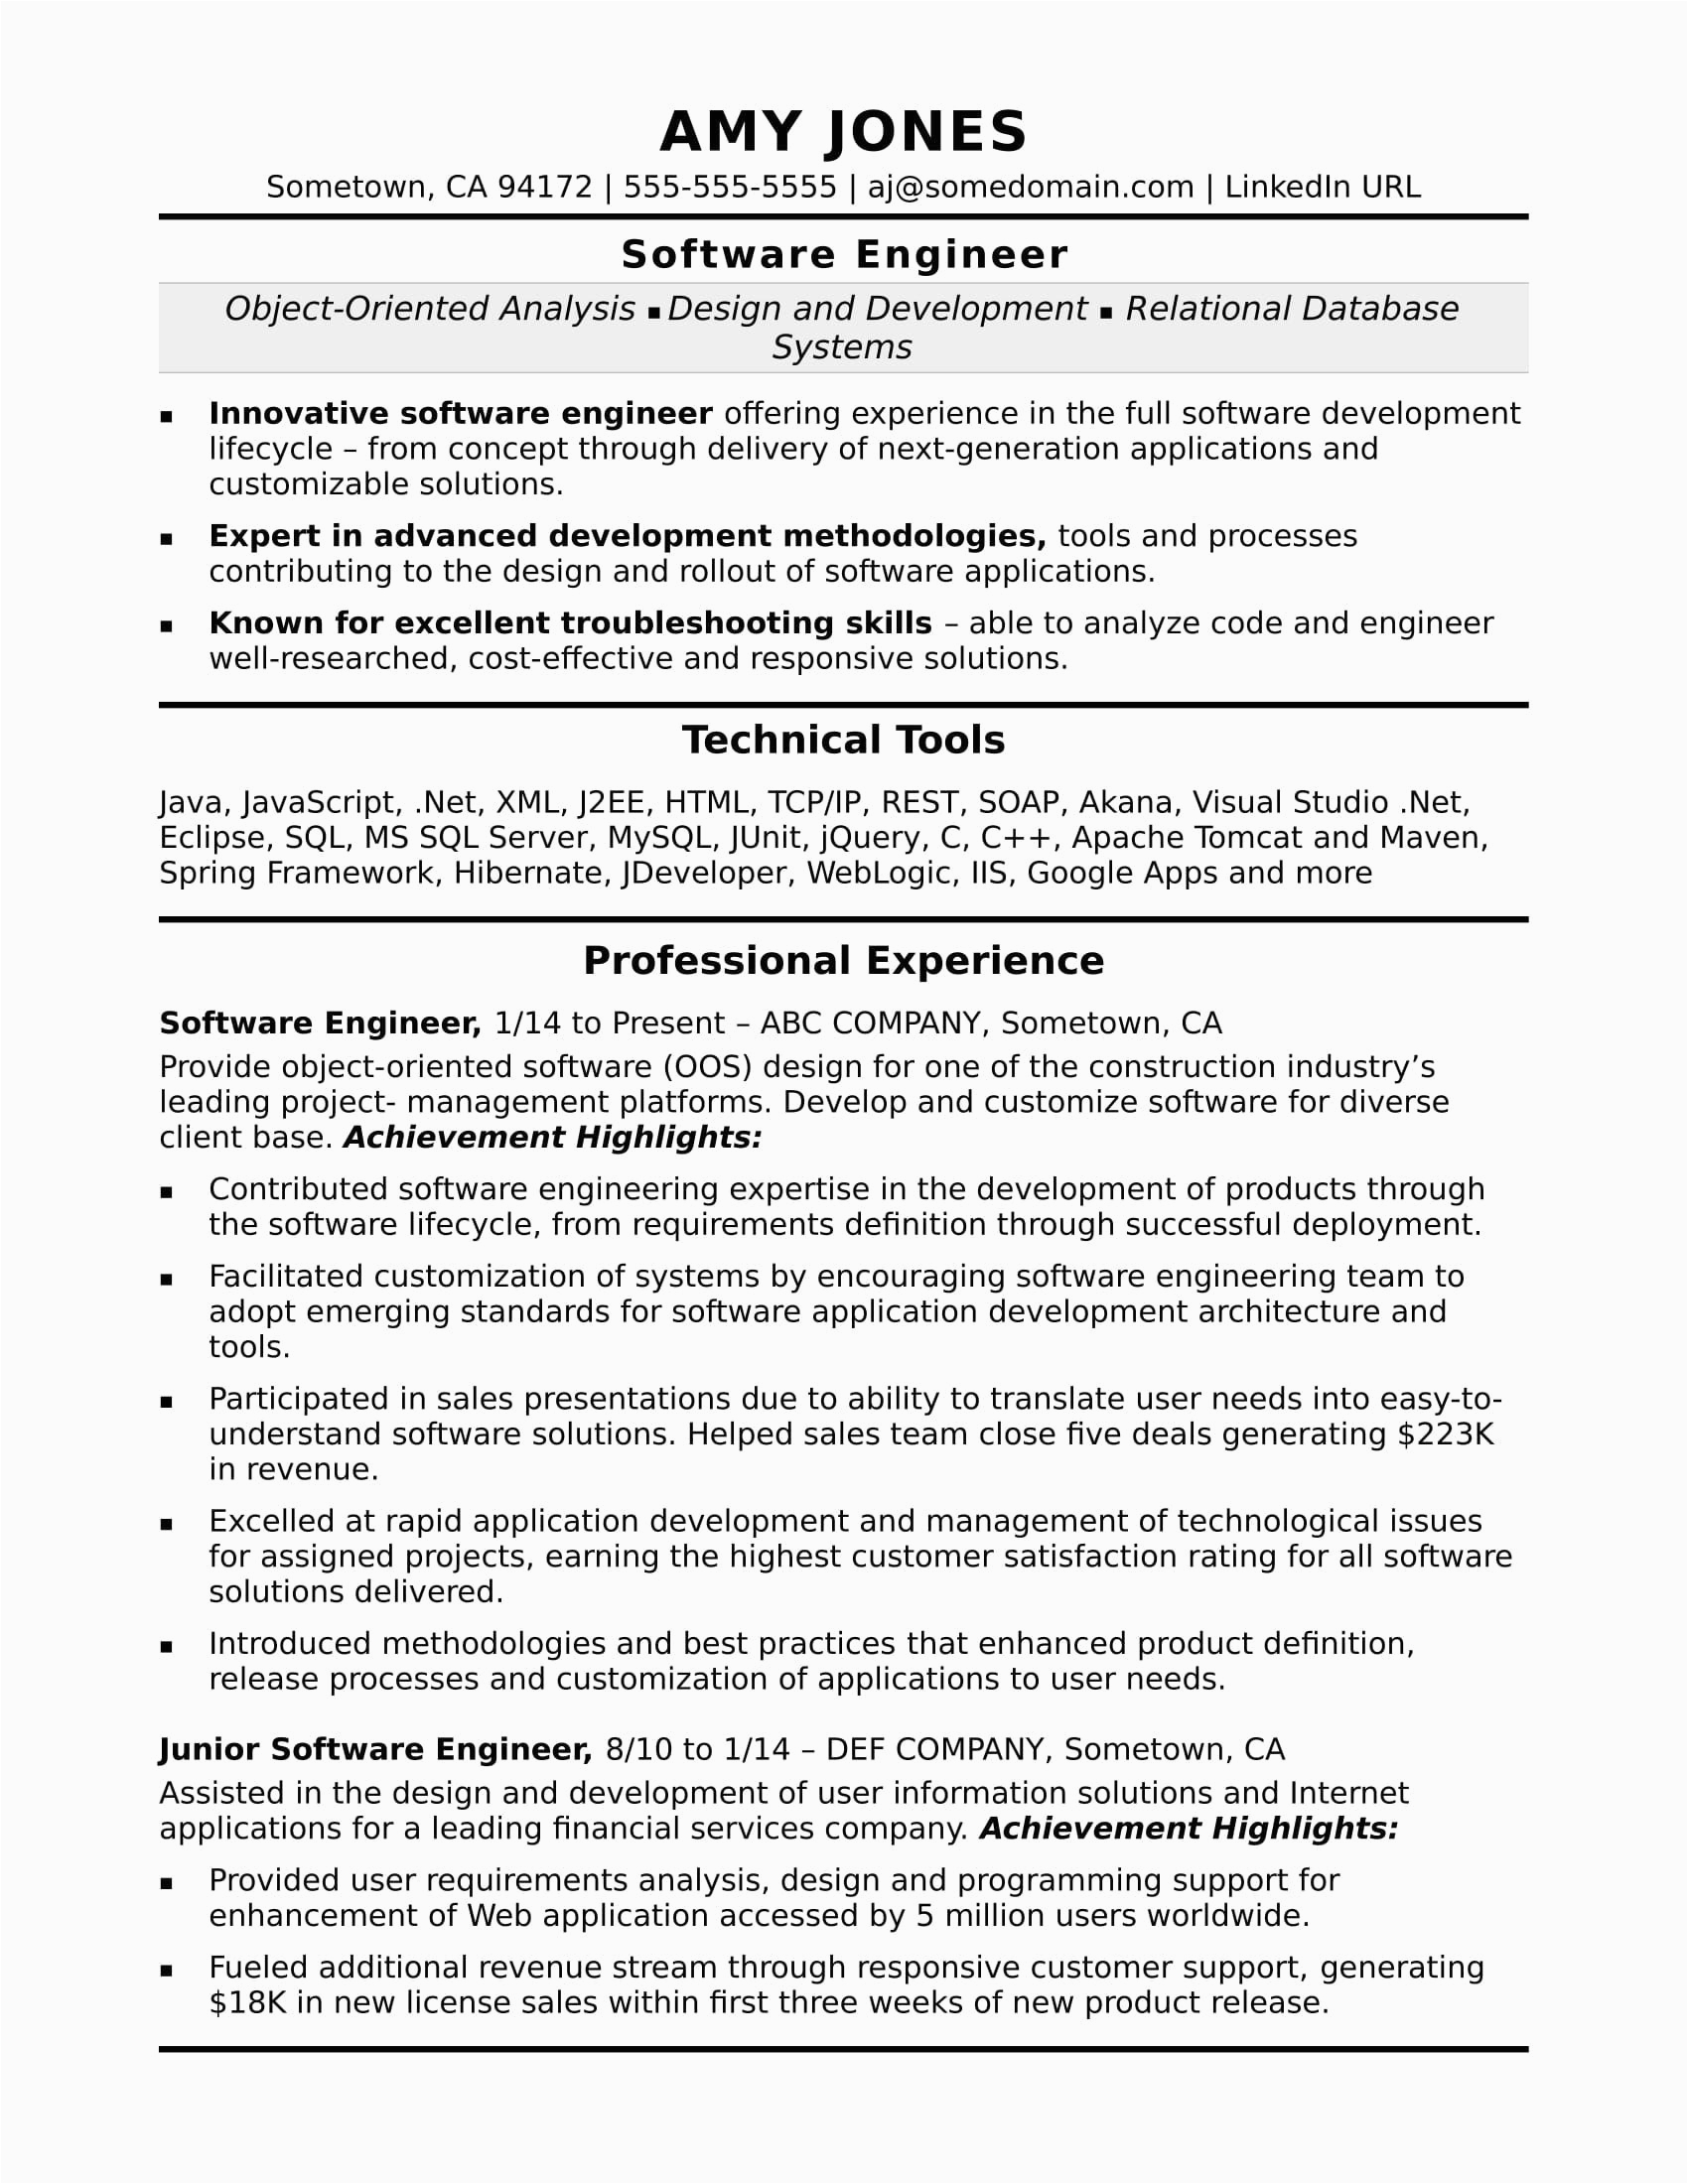 Sample Resume Objective for software Engineer Resume format software Engineer Resume format